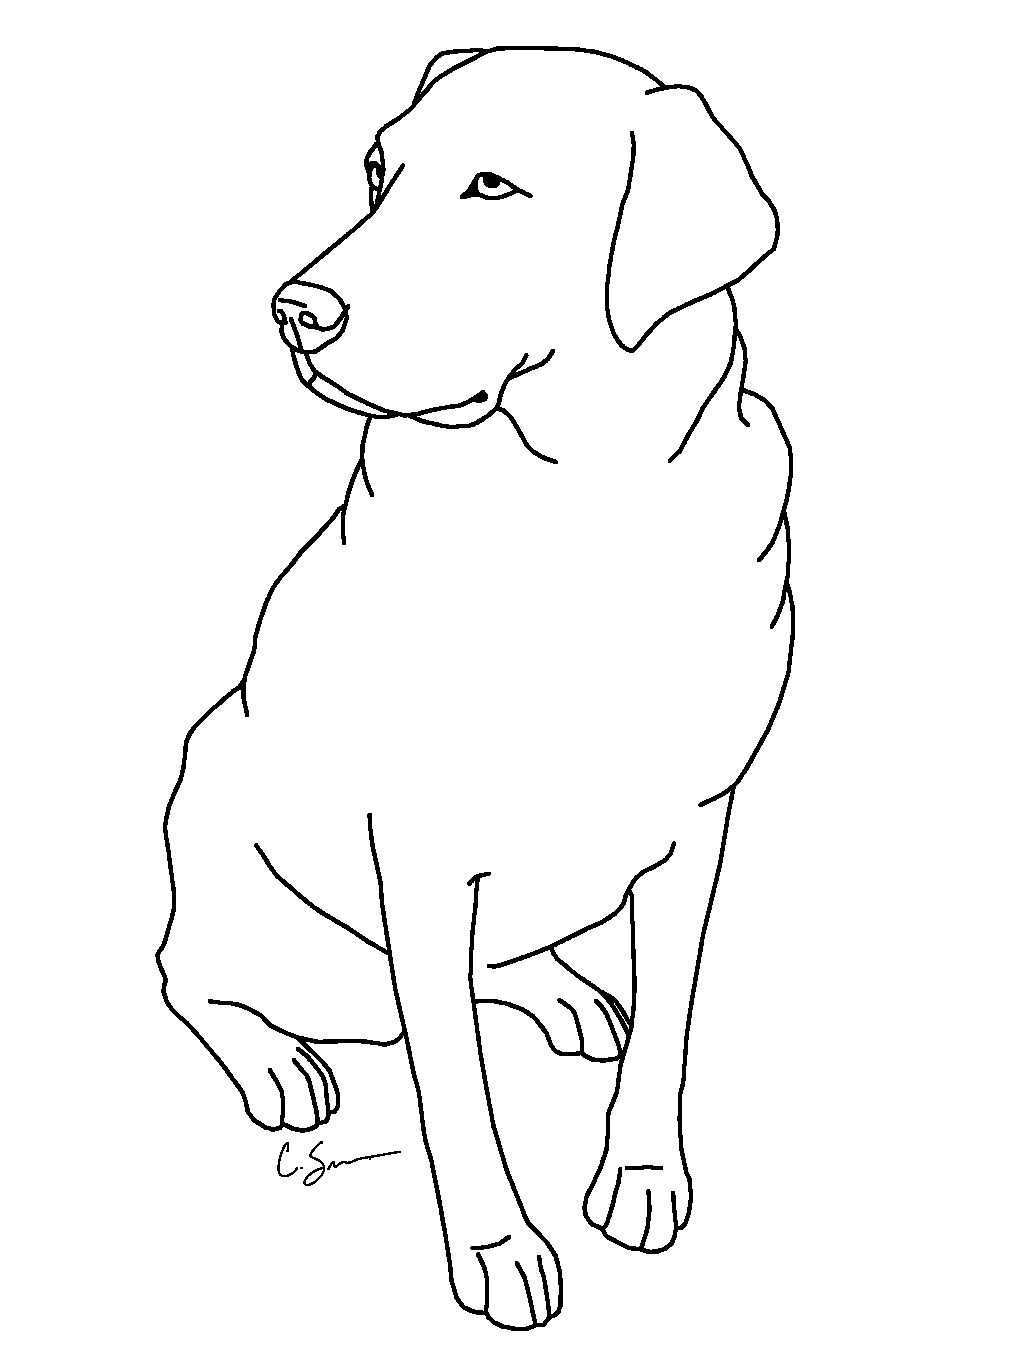 Printable Dog Coloring Pages Ideas For Kids Free Coloring Sheets Dog Coloring Page Pu